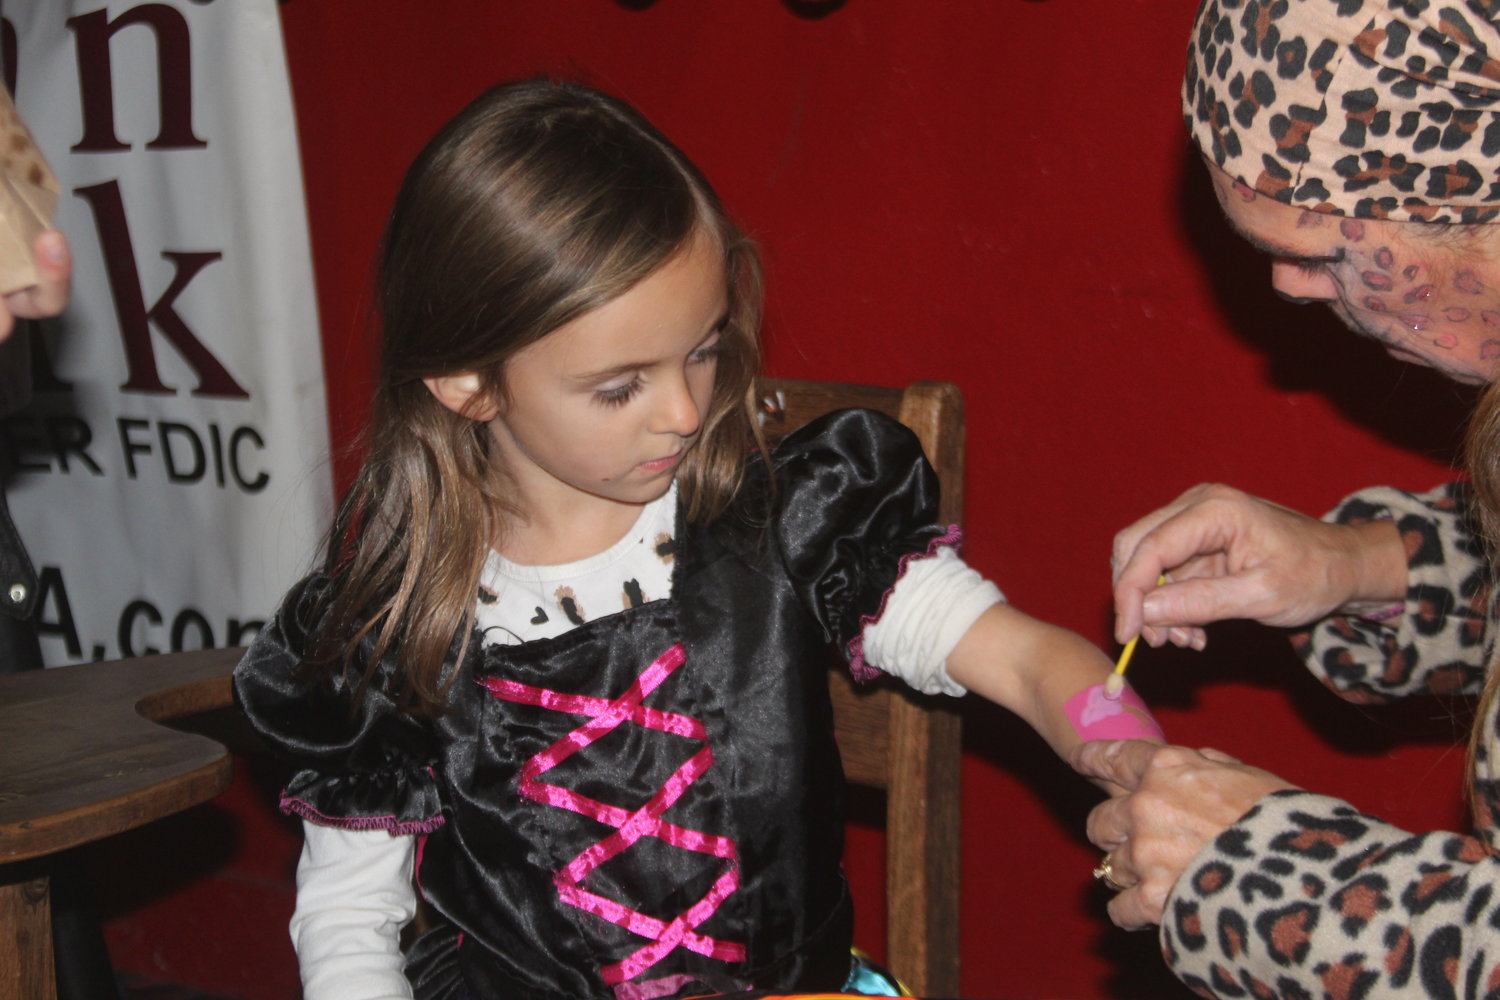 Dakota Blum gets a temporary tattoo at the Wellman Halloween Party at the Wellman Skating Rink on Oct. 31.